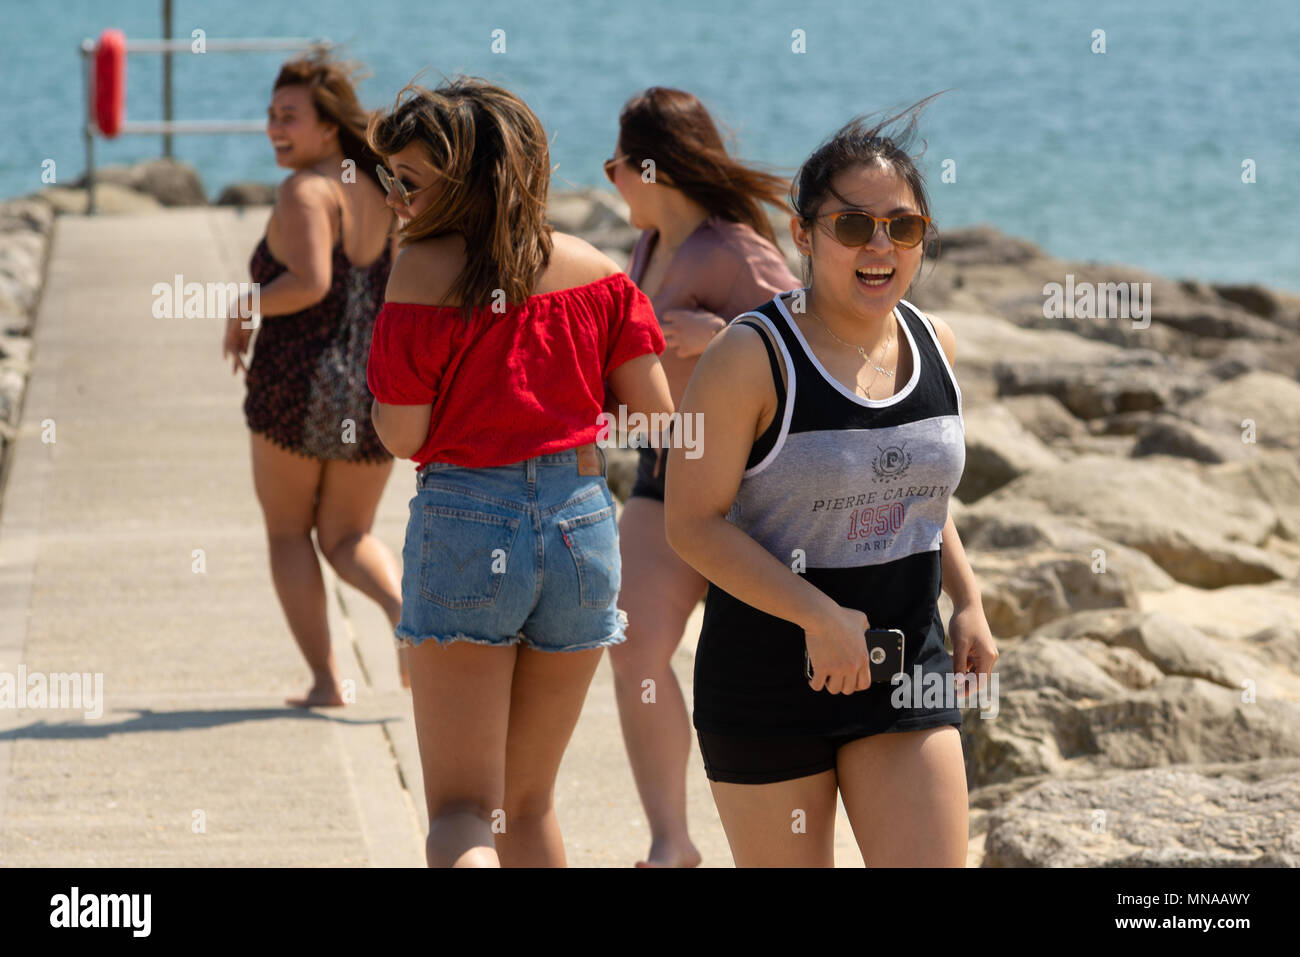 A group of teenage girls having fun choreographing their own dance routine on seafront rocks. Stock Photo